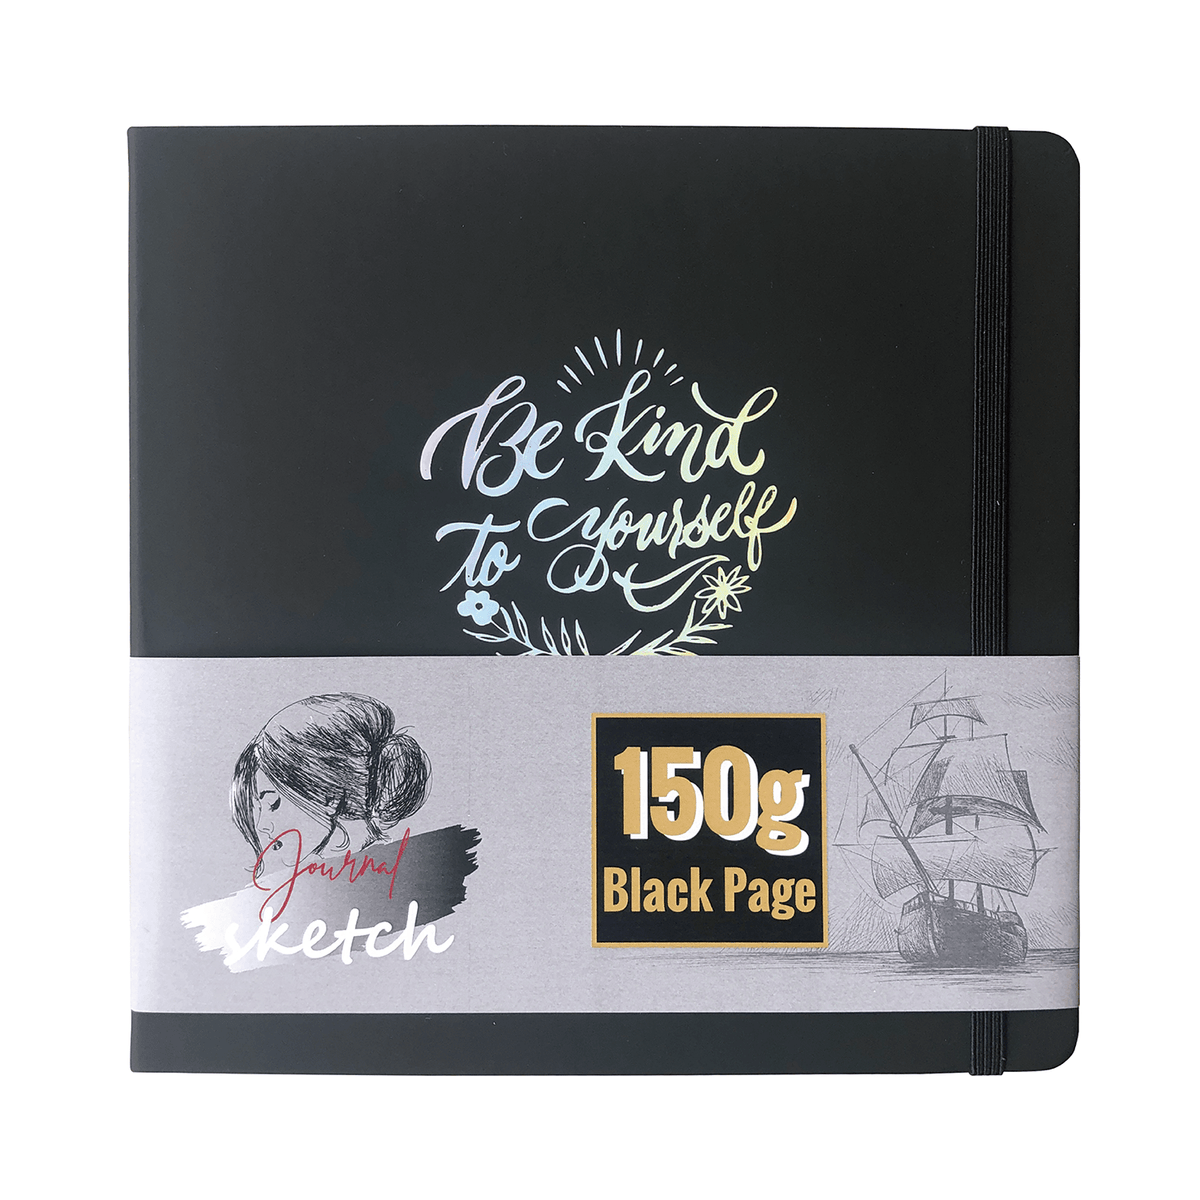 8 x 8 Inch Hardcover Sketch Journal – 150GSM Black Paper 160 Pages - White